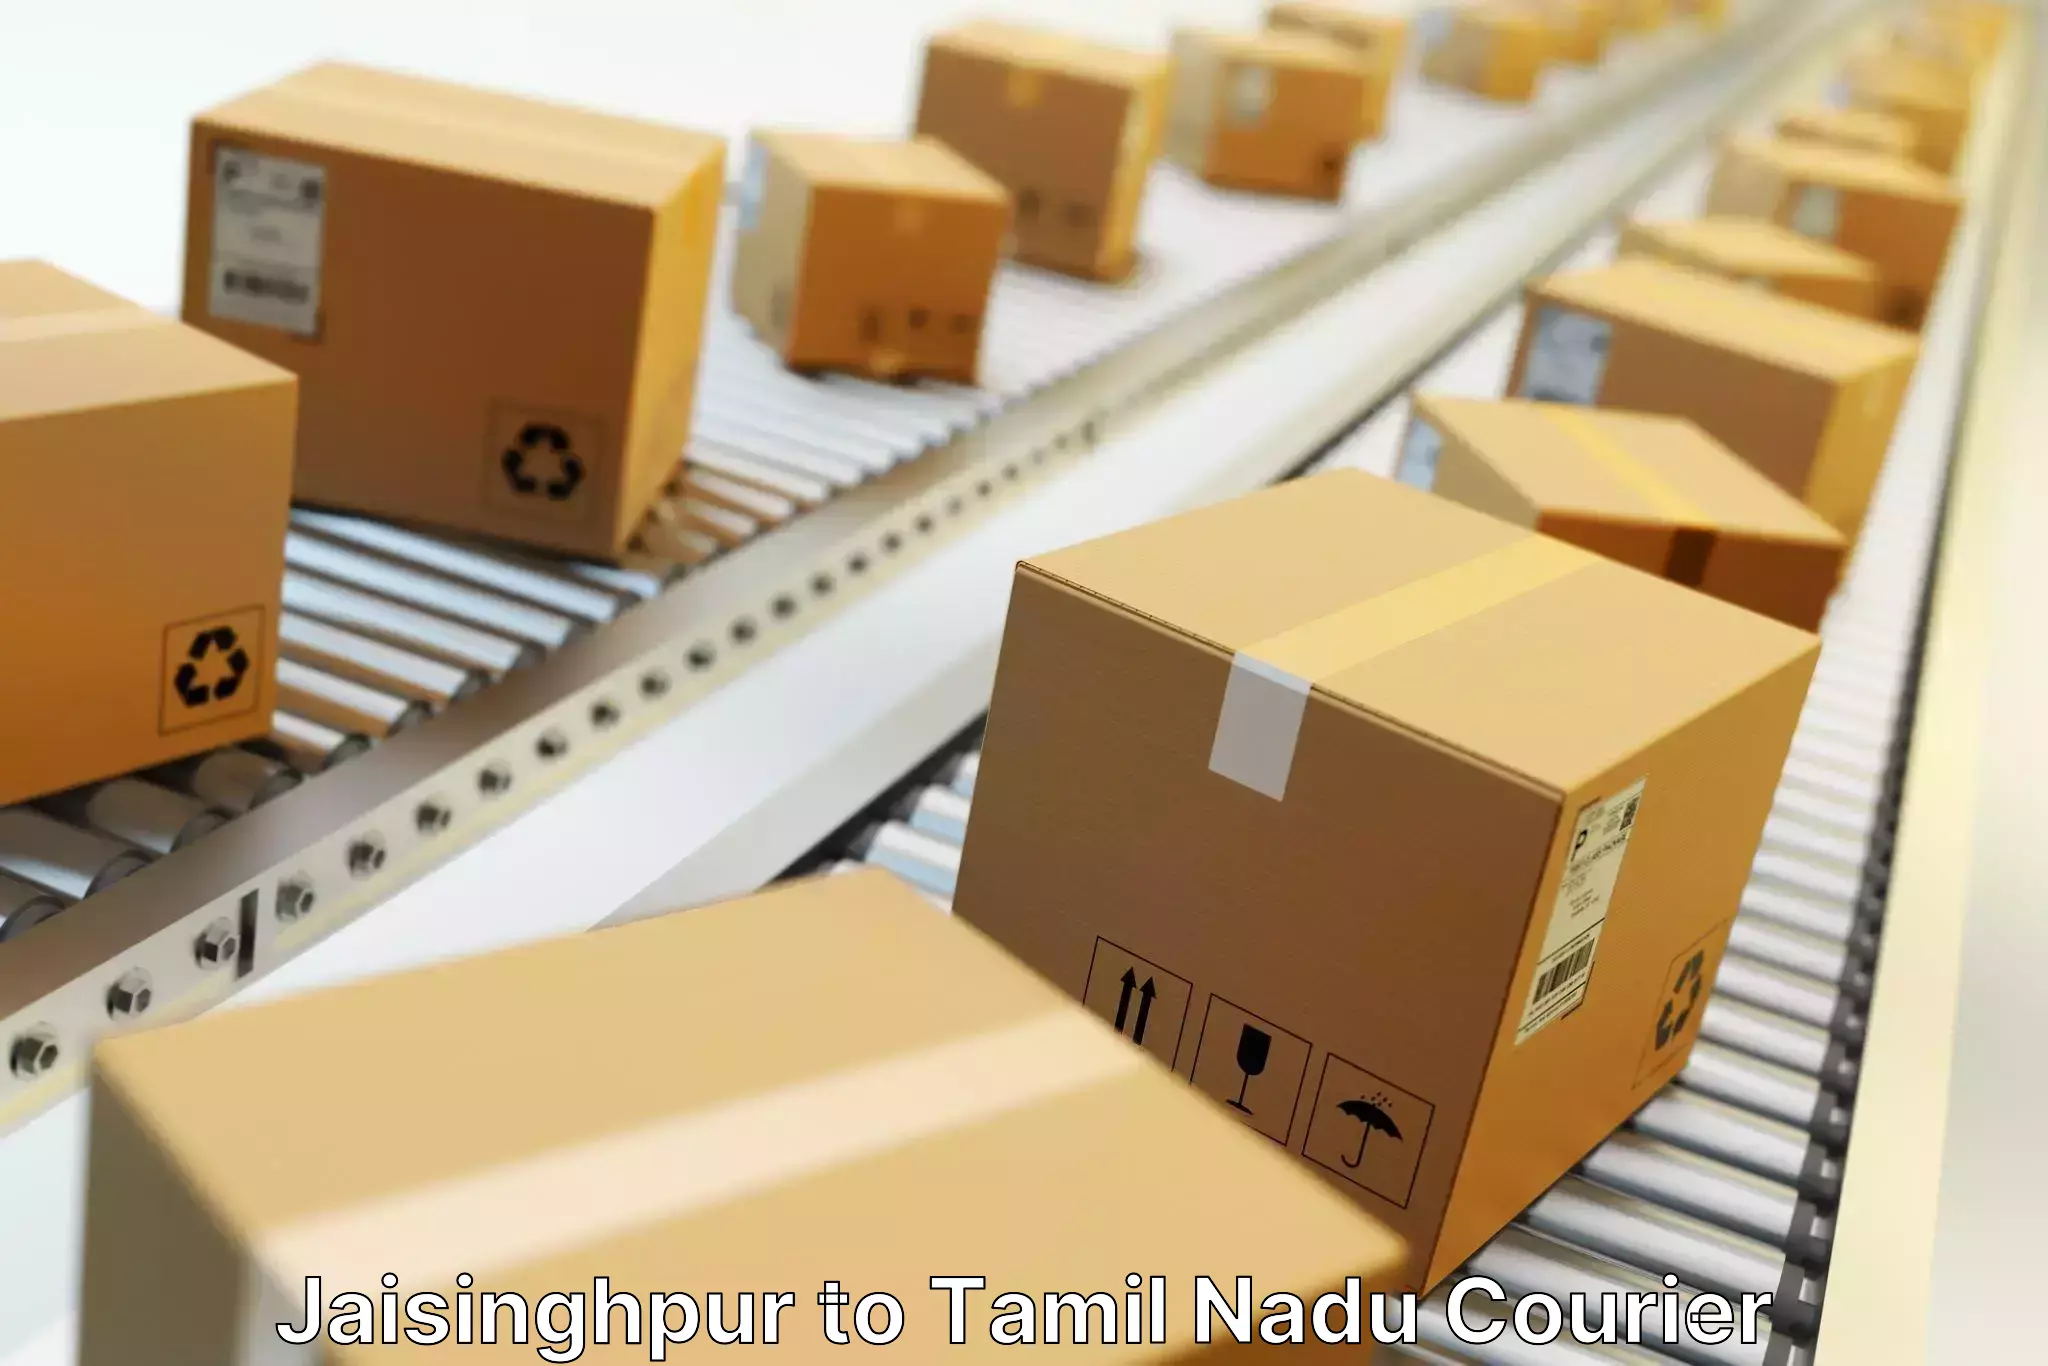 Optimized delivery routes in Jaisinghpur to Tamil Nadu